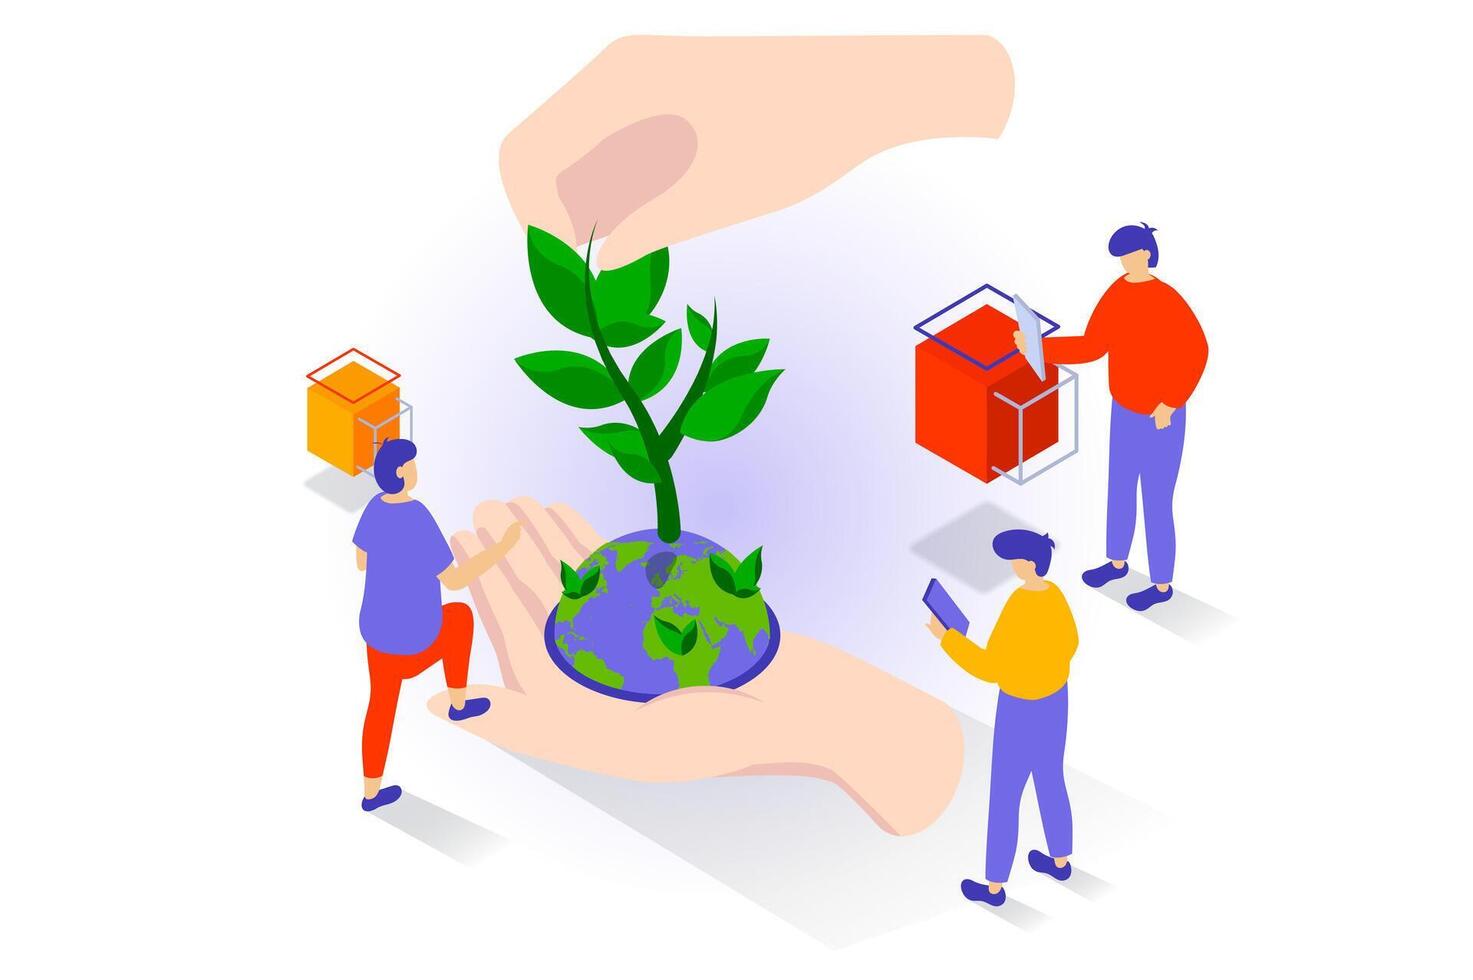 Eco lifestyle concept in 3d isometric design. People care about environment and nature of planet, using environmentally friendly technologies. Vector illustration with isometry scene for web graphic